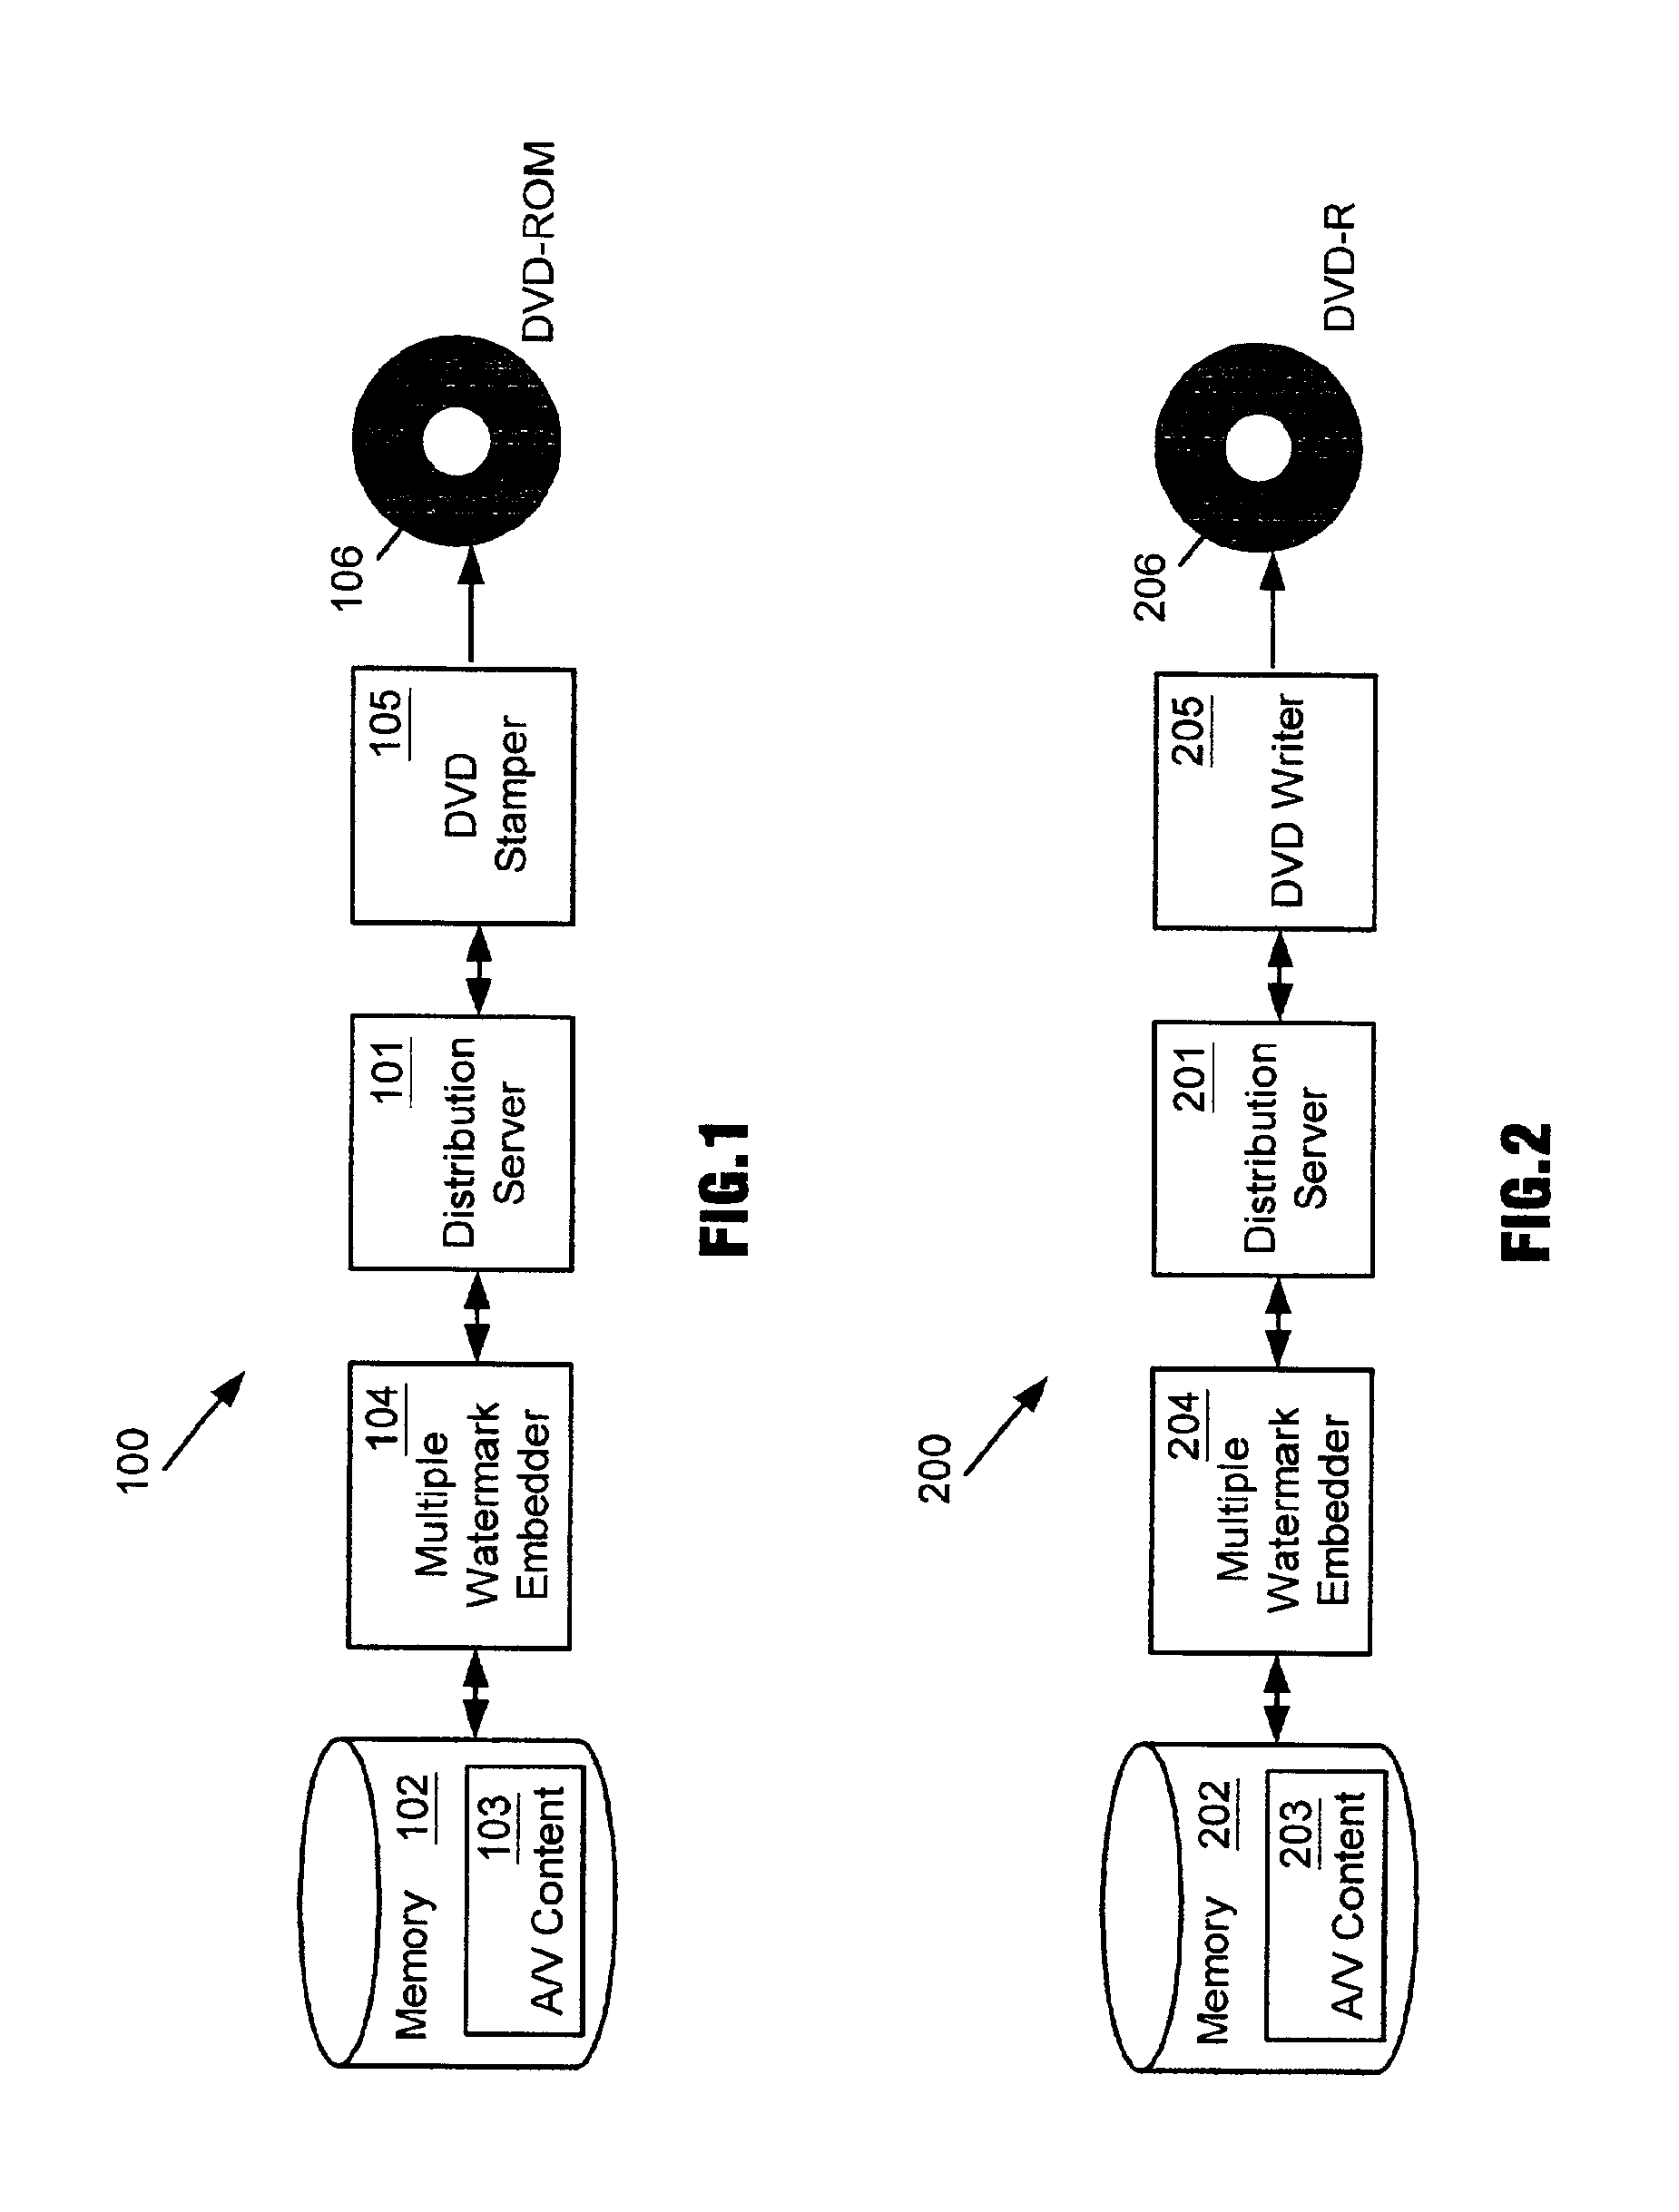 Enhanced copy protection of proprietary material employing multiple watermarks